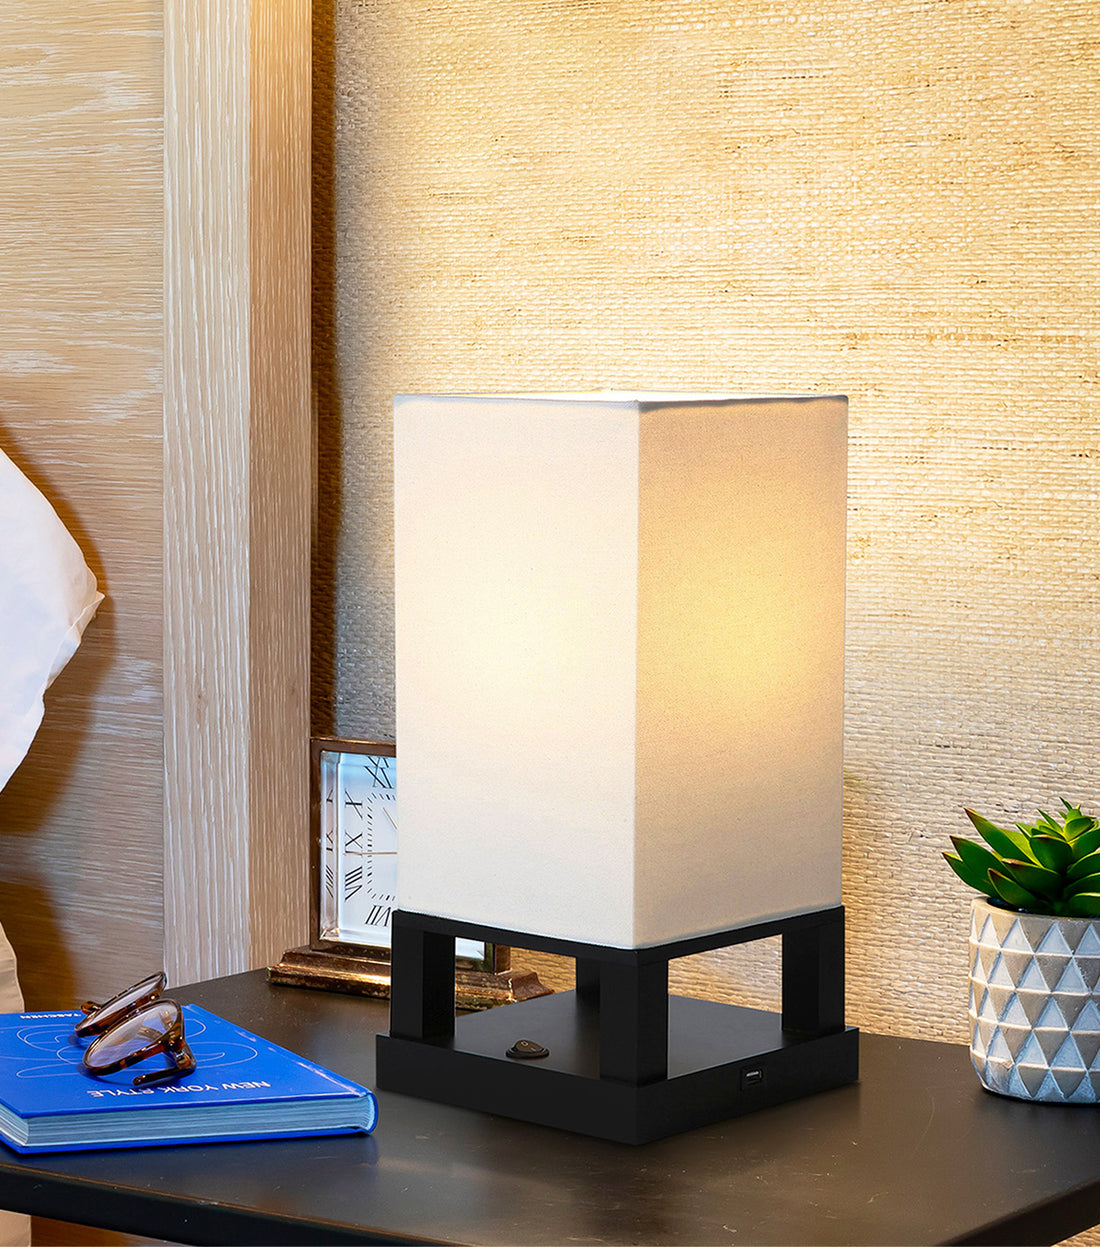 Brightech Maxwell - Bedroom Nightstand Lamp with USB Ports – Modern Asian Table Lamp w/ Wood Frame - Soft Light Perfect for Bedside - with LED Bulb